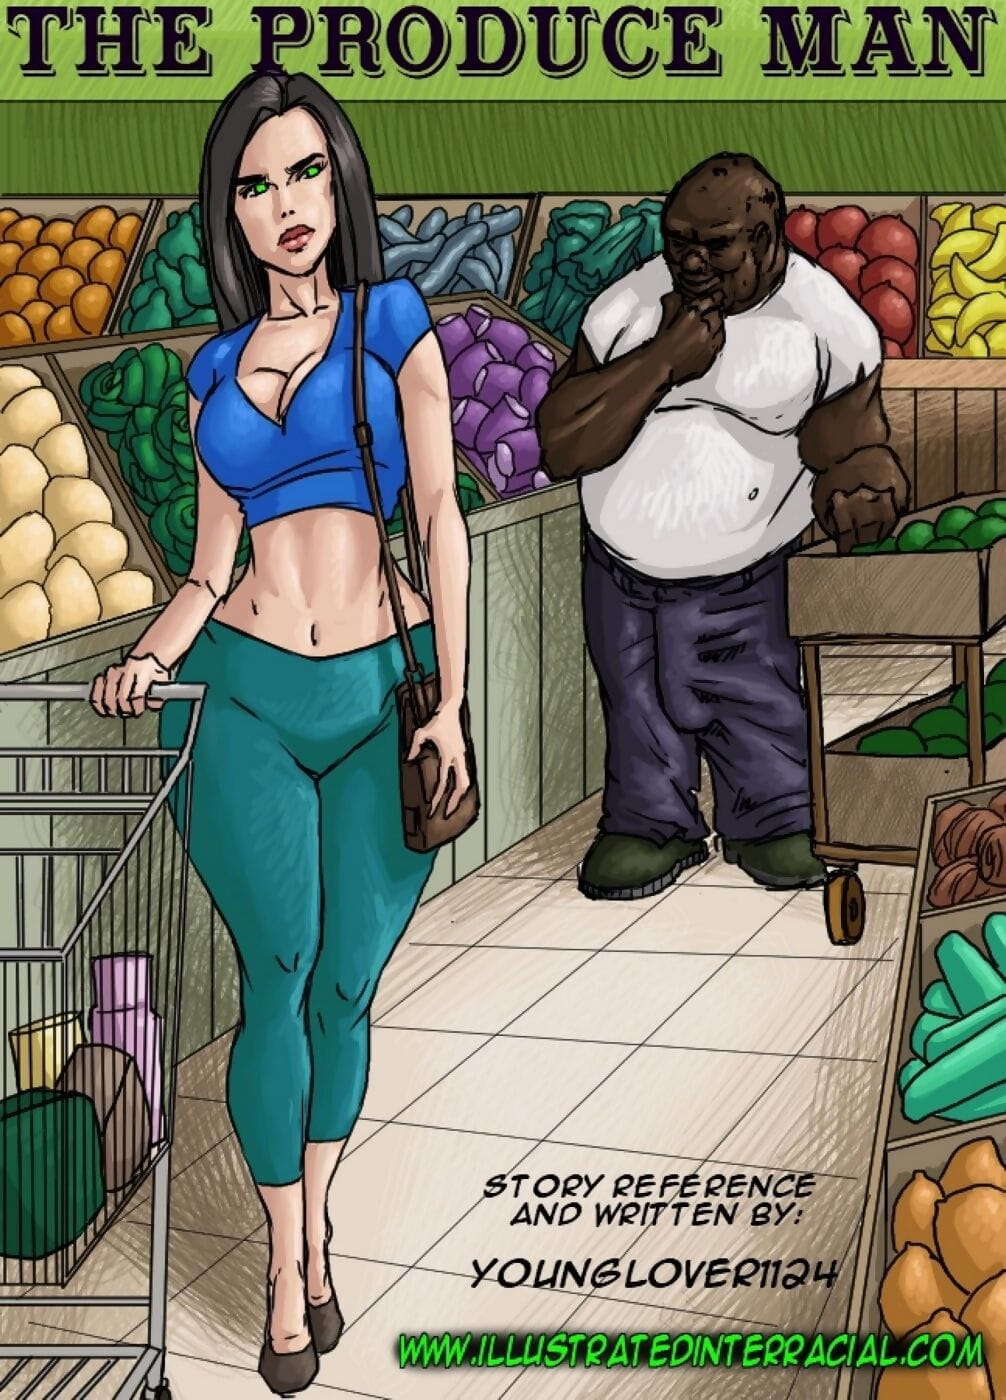 Illustrated Interracial- The Produce Man page 1